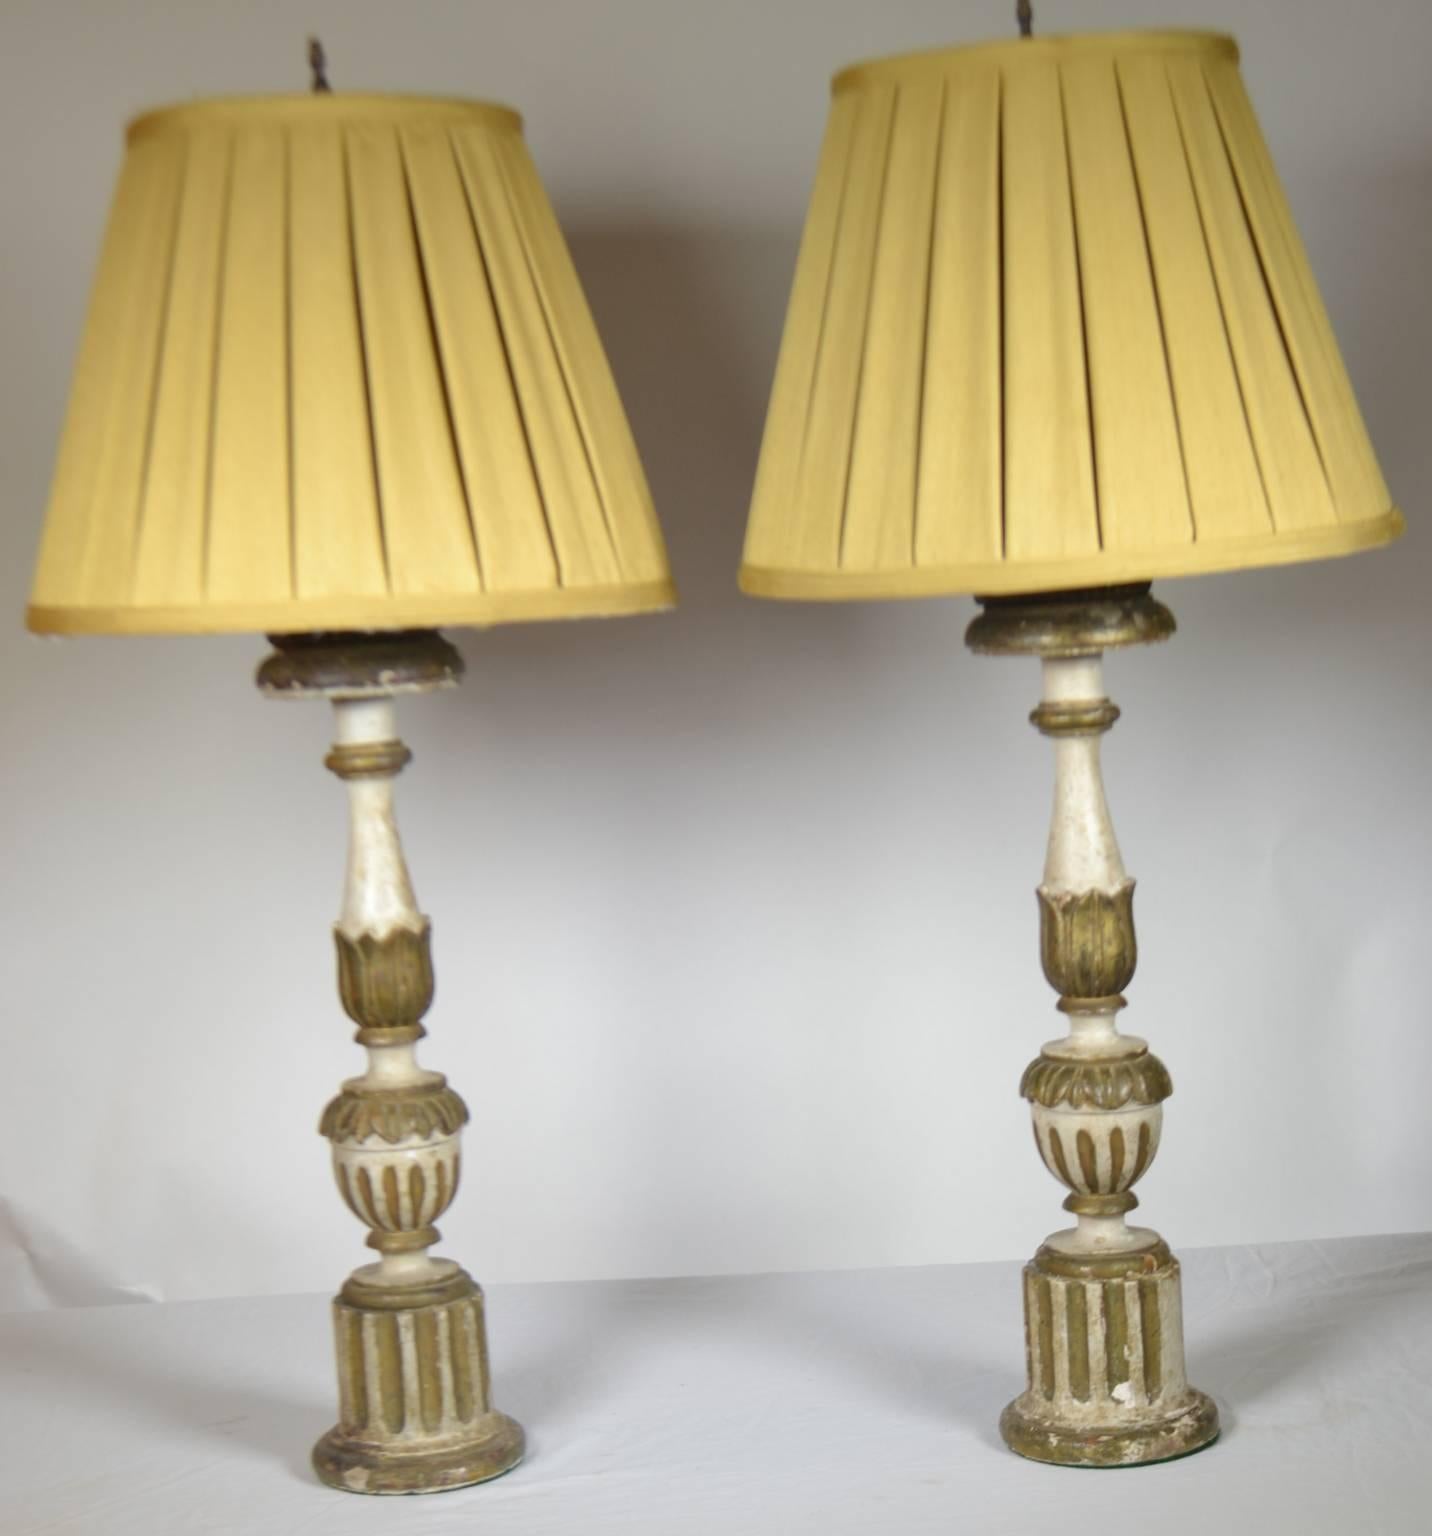 18th century pair of Polychromed Italian fluted candlestick lamps.